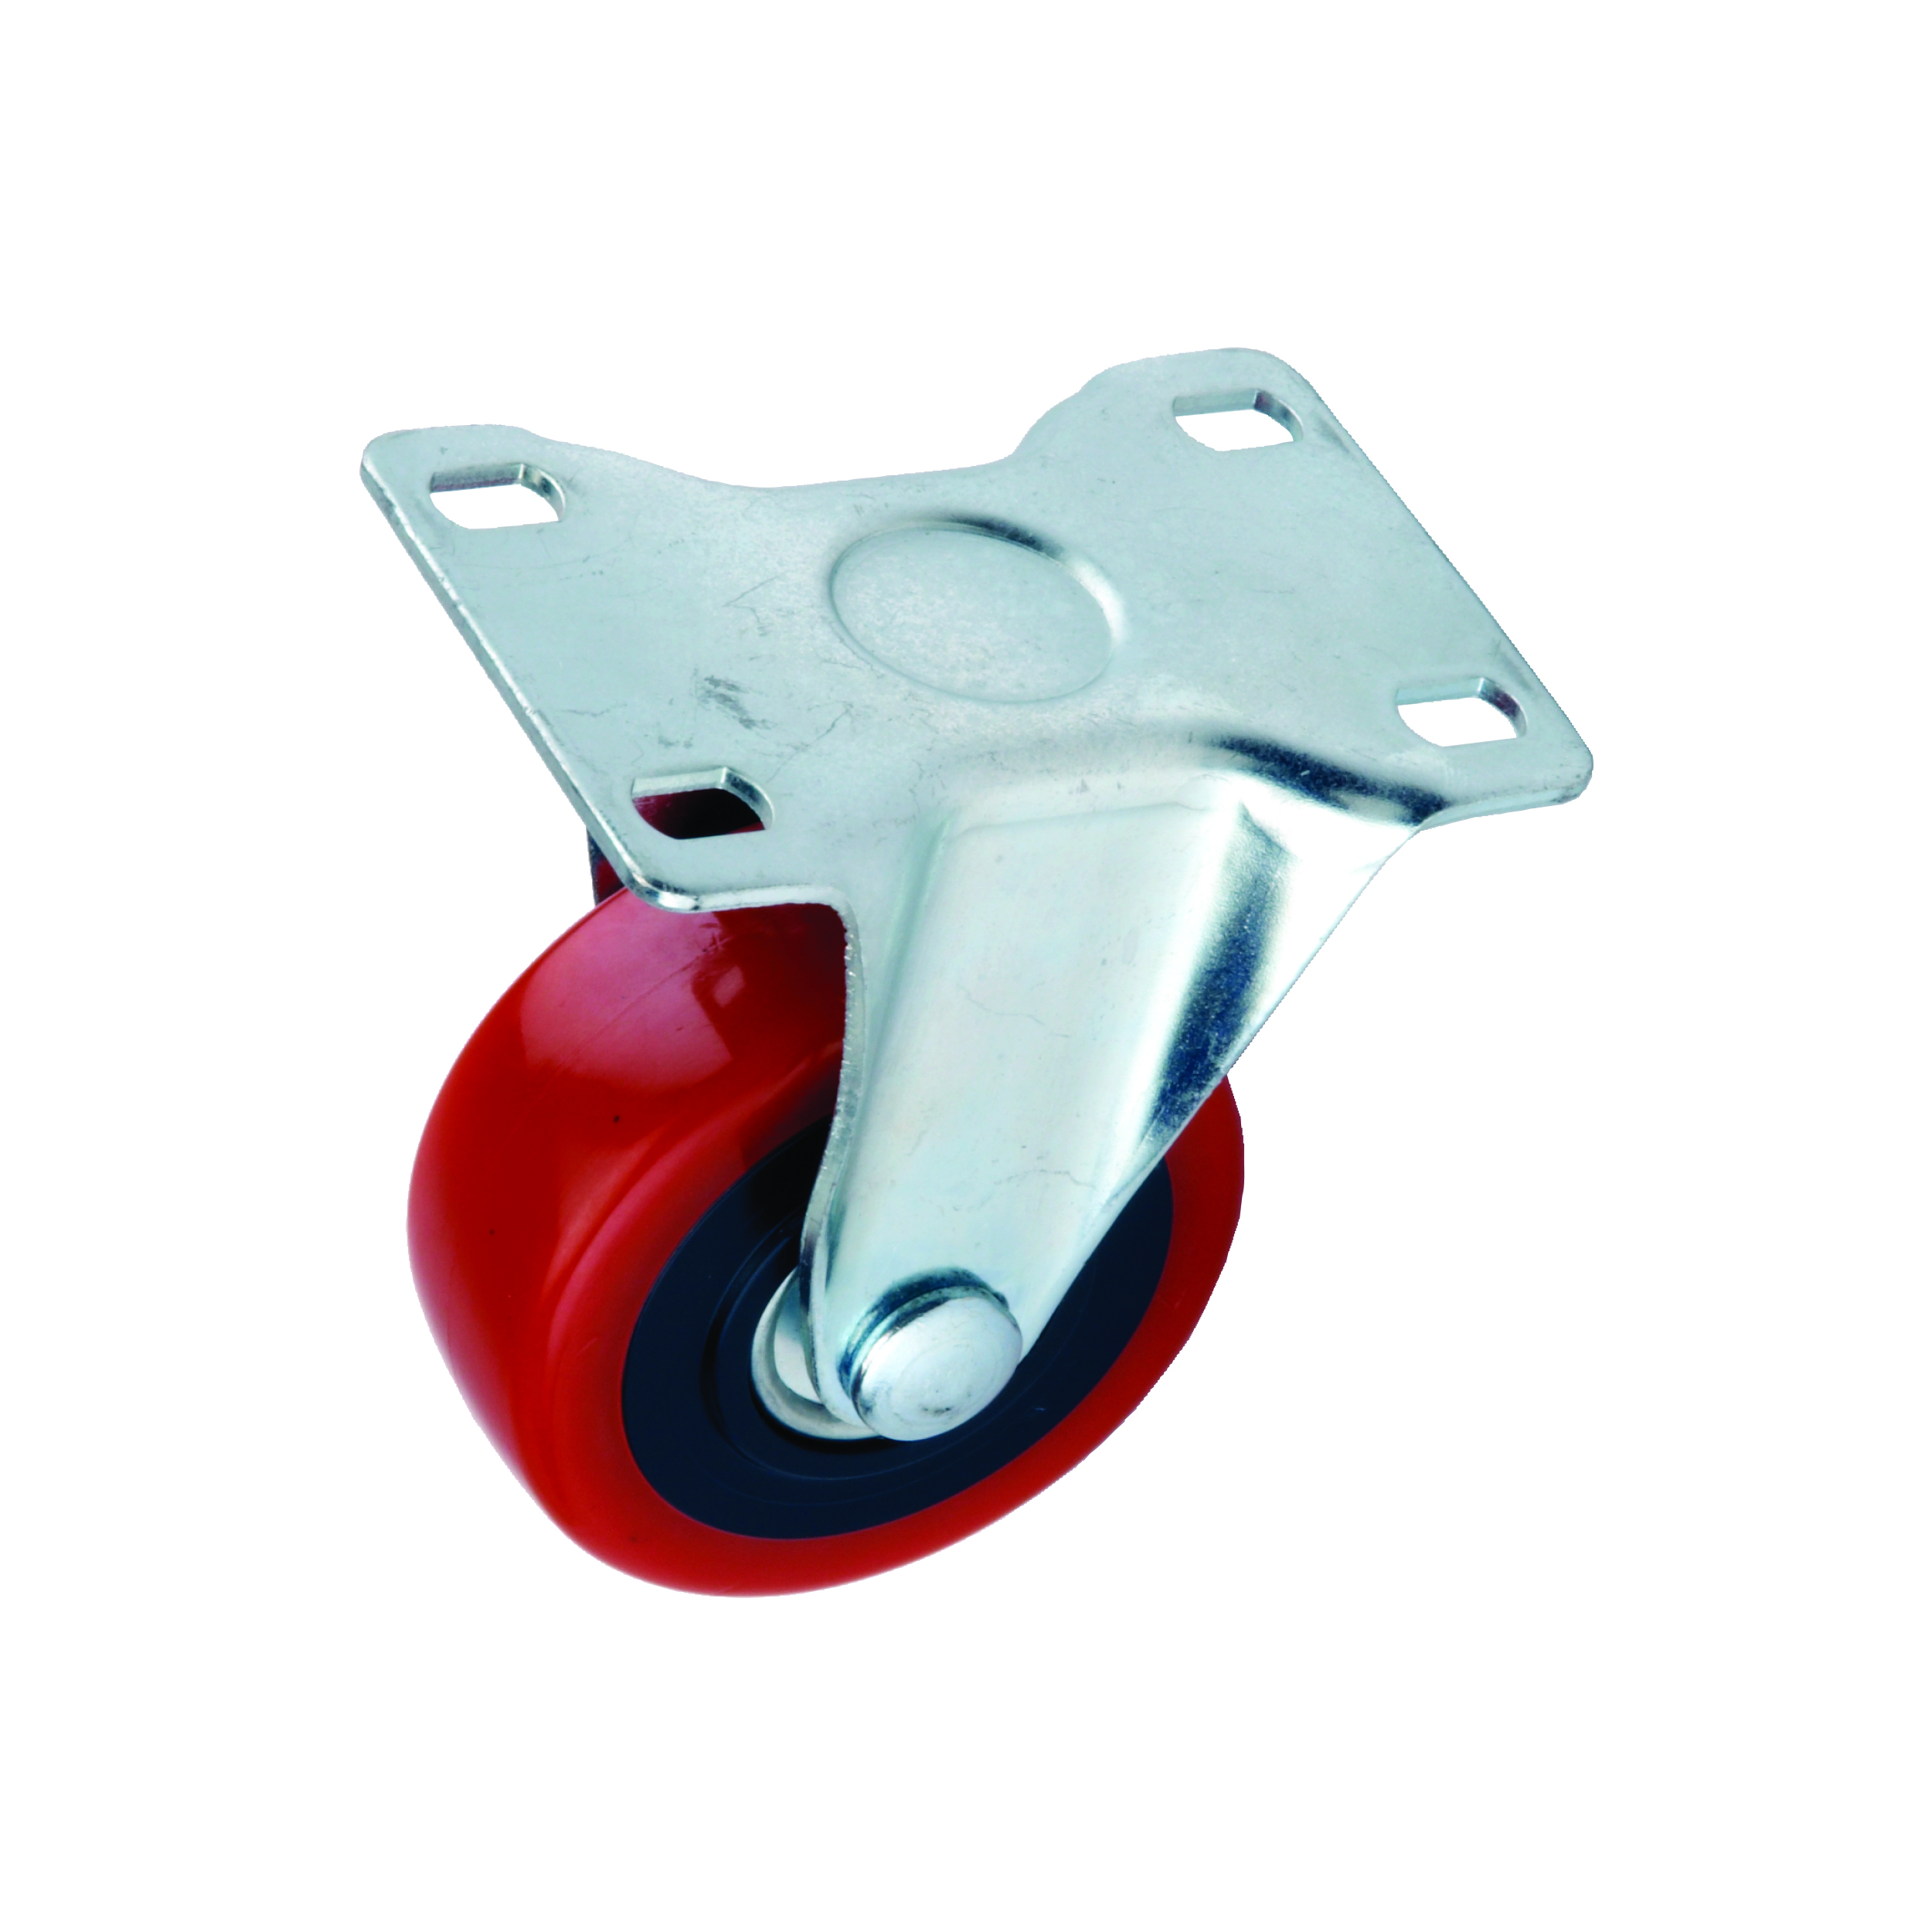 3" Caster, Non-locking, Non-swiveling With 4 Hole Mounting Plate, 4-1/4" Tall